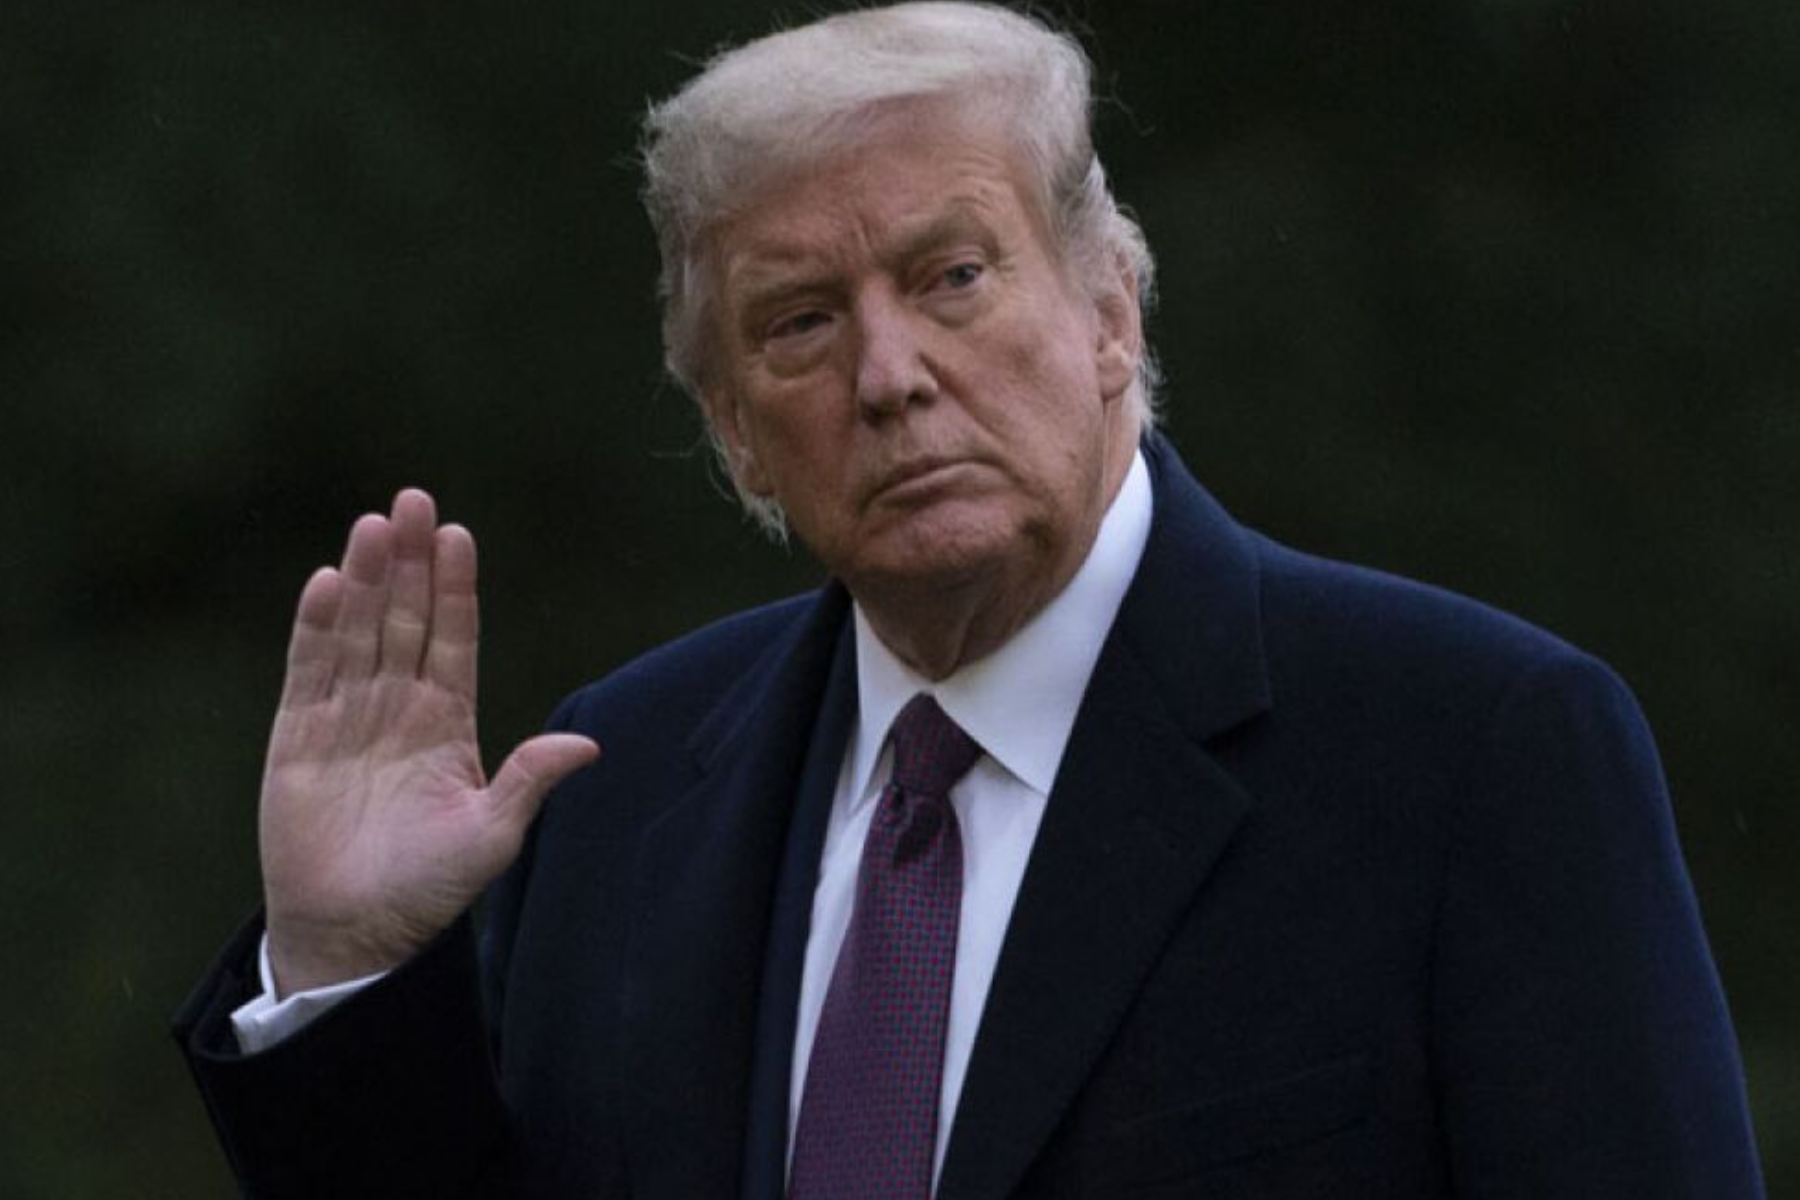 Former President Donald Trump raises his hand while wearing a black coat